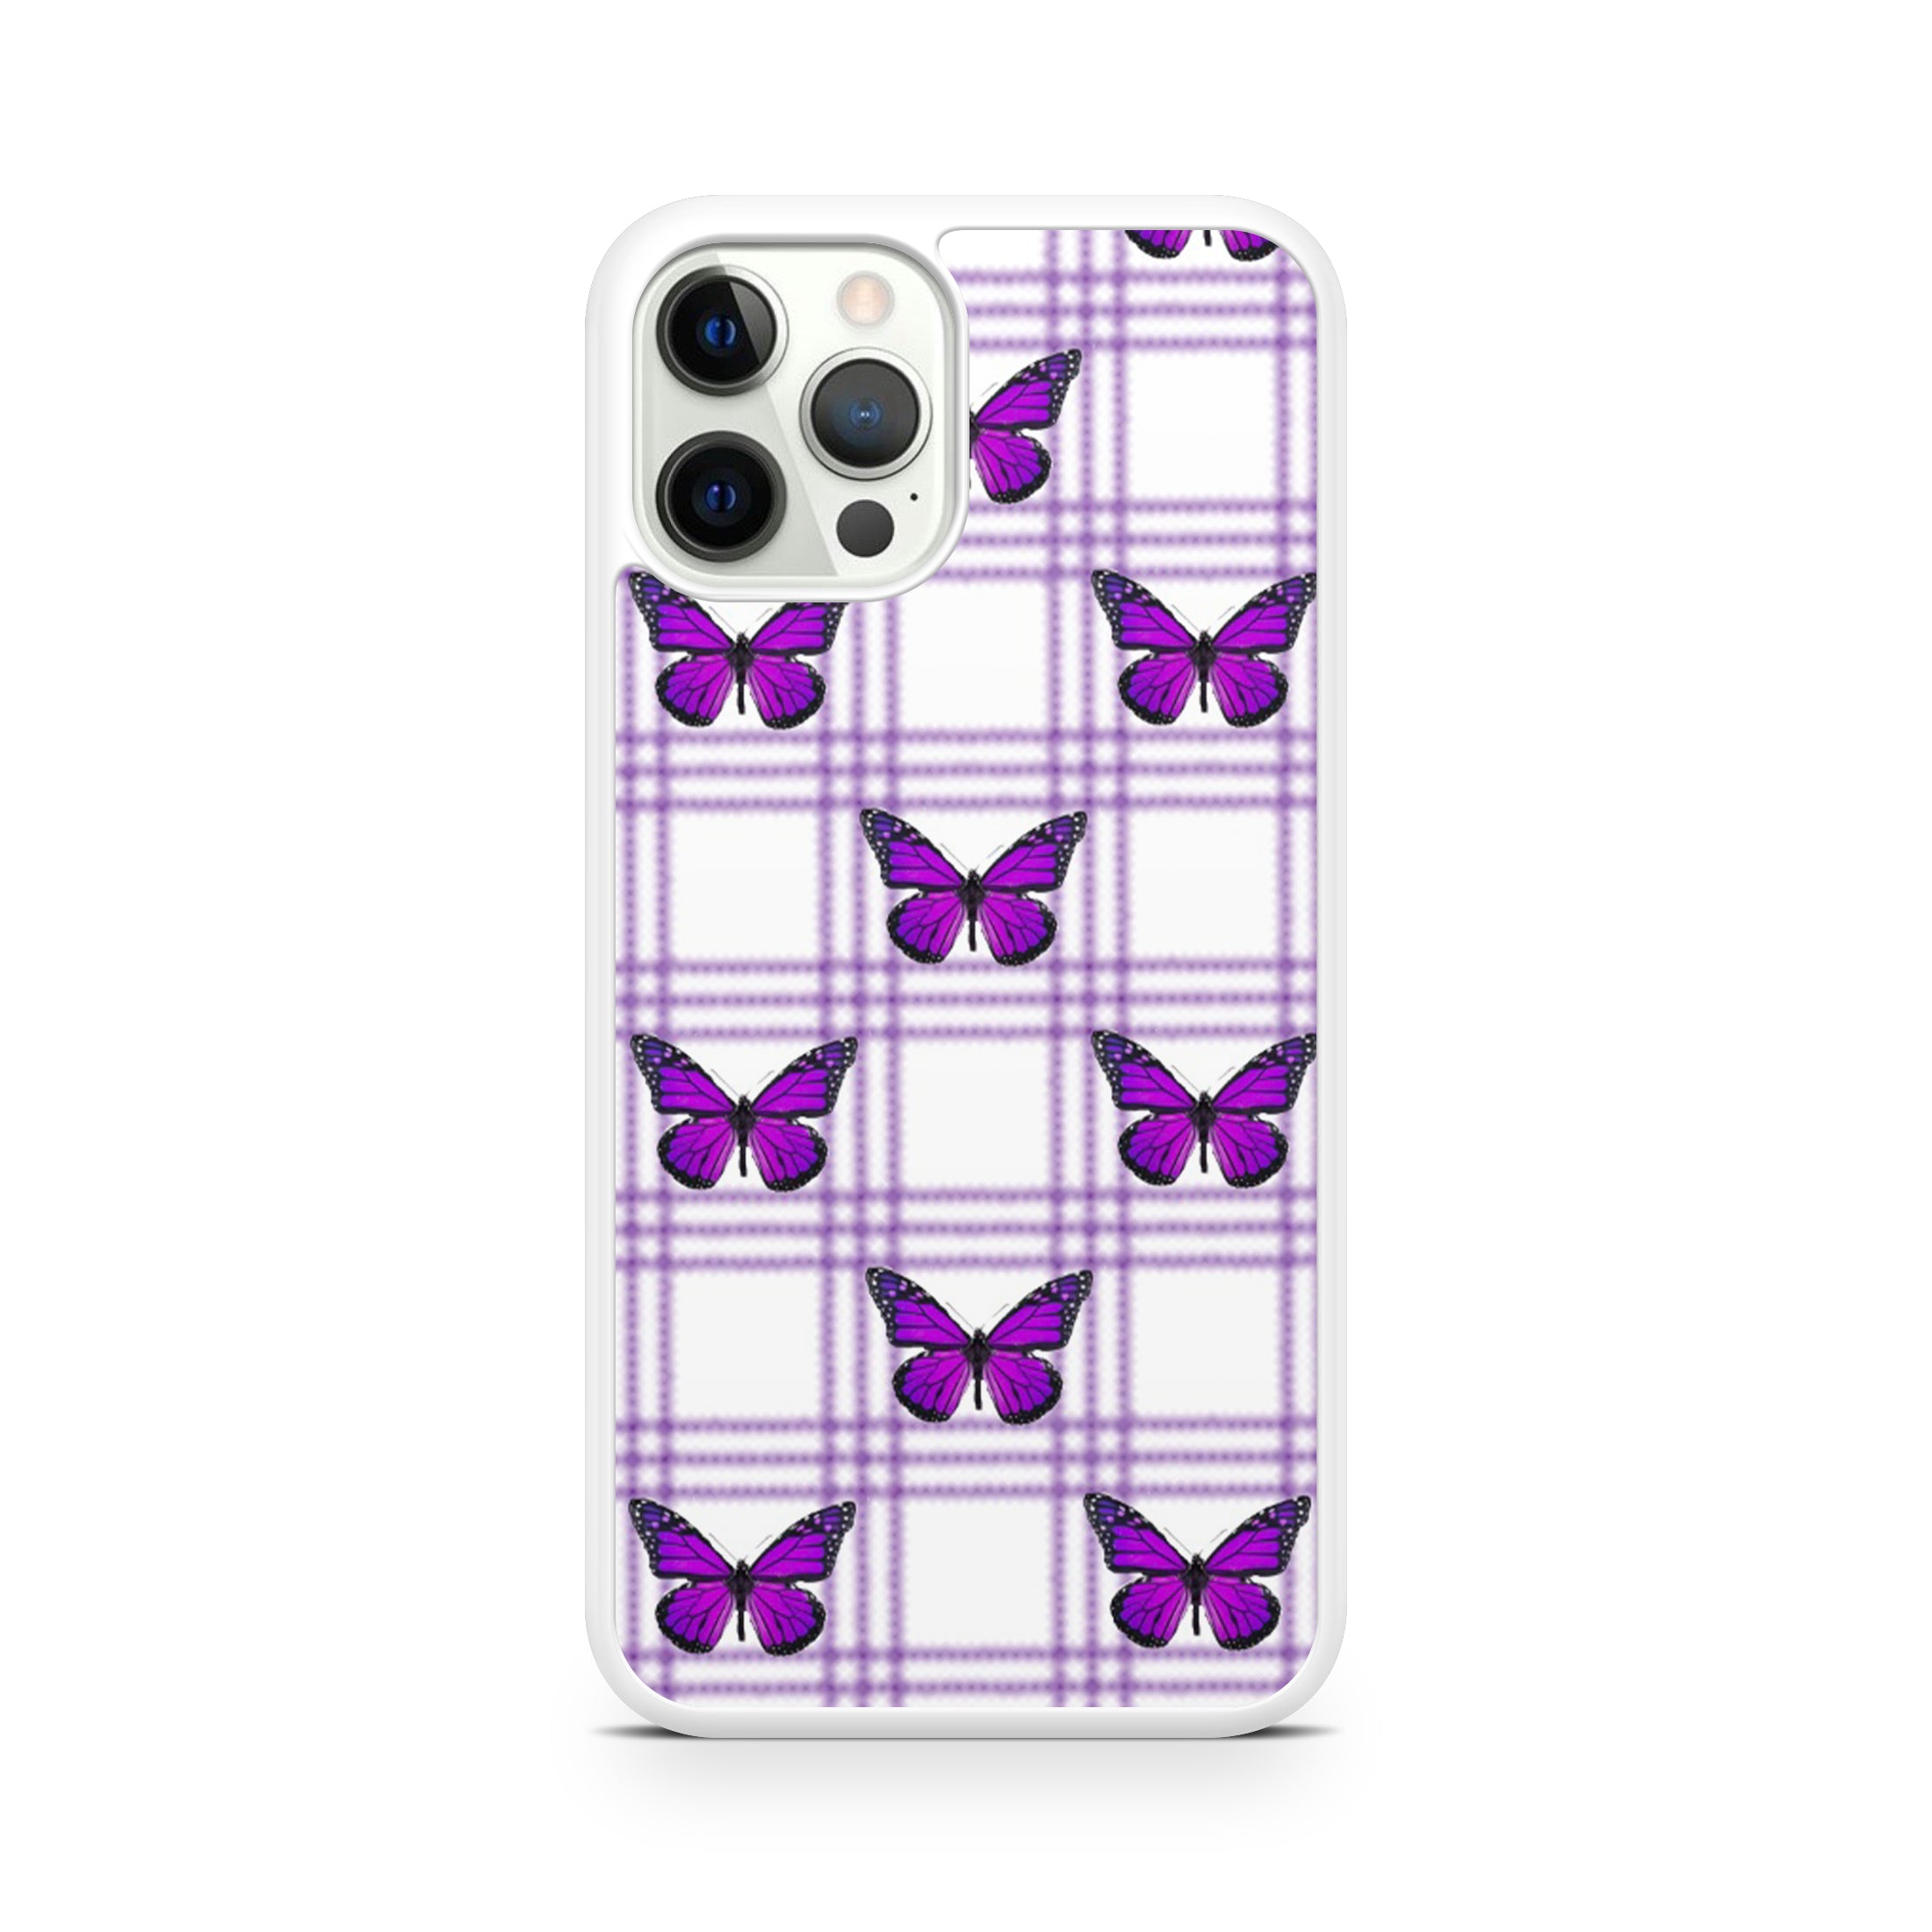 Vibrant purple butterflies and checkered  print iPhone case